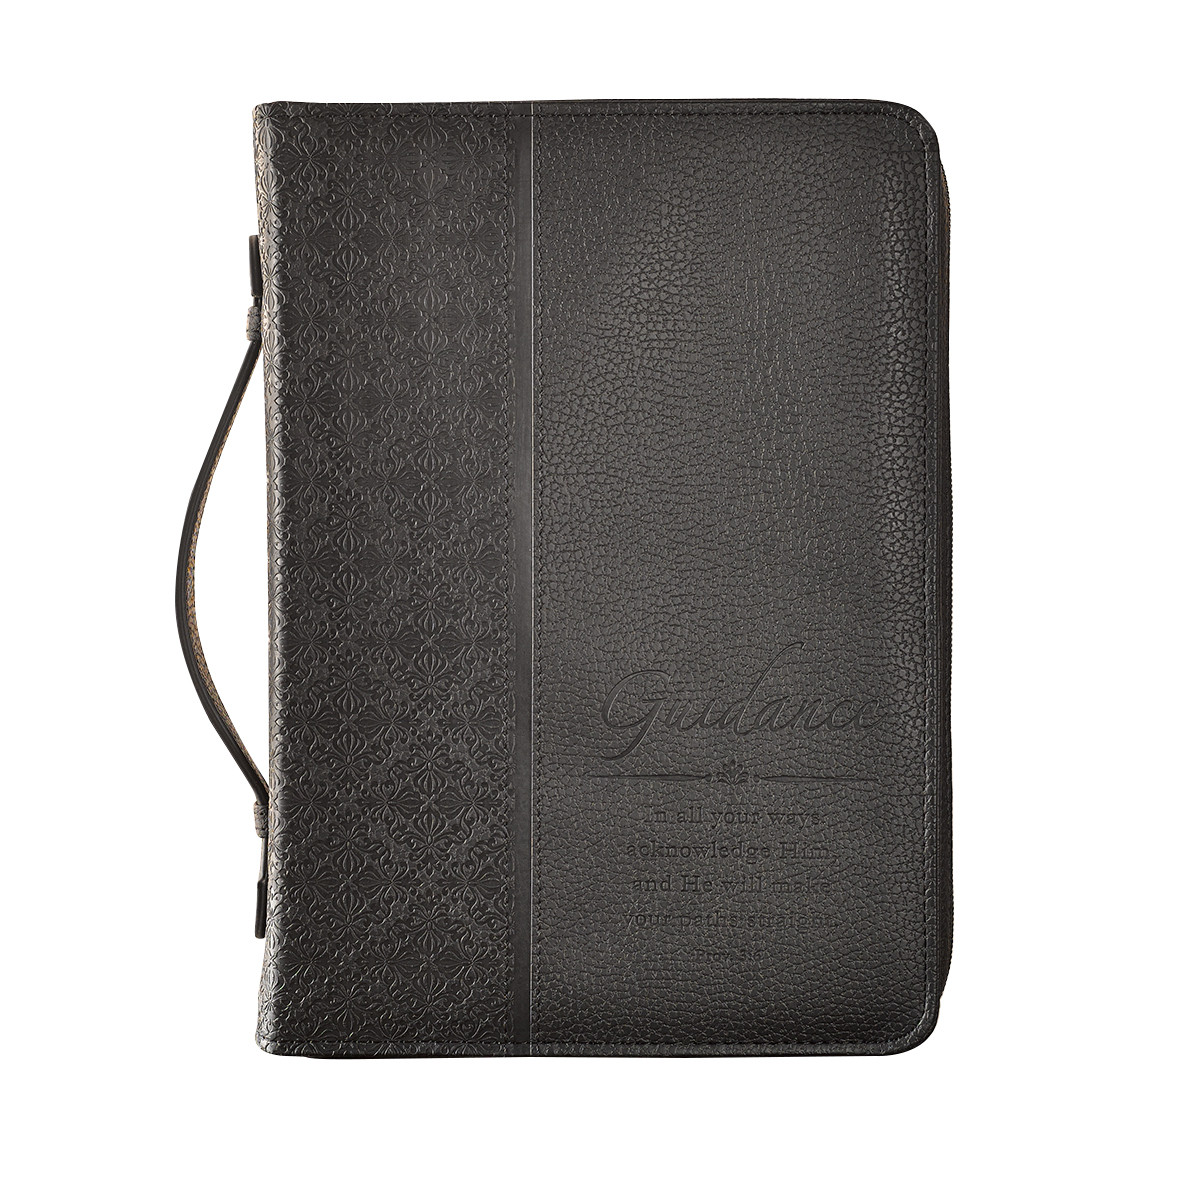 Guidance Black Faux Leather Classic Bible Cover (Large)